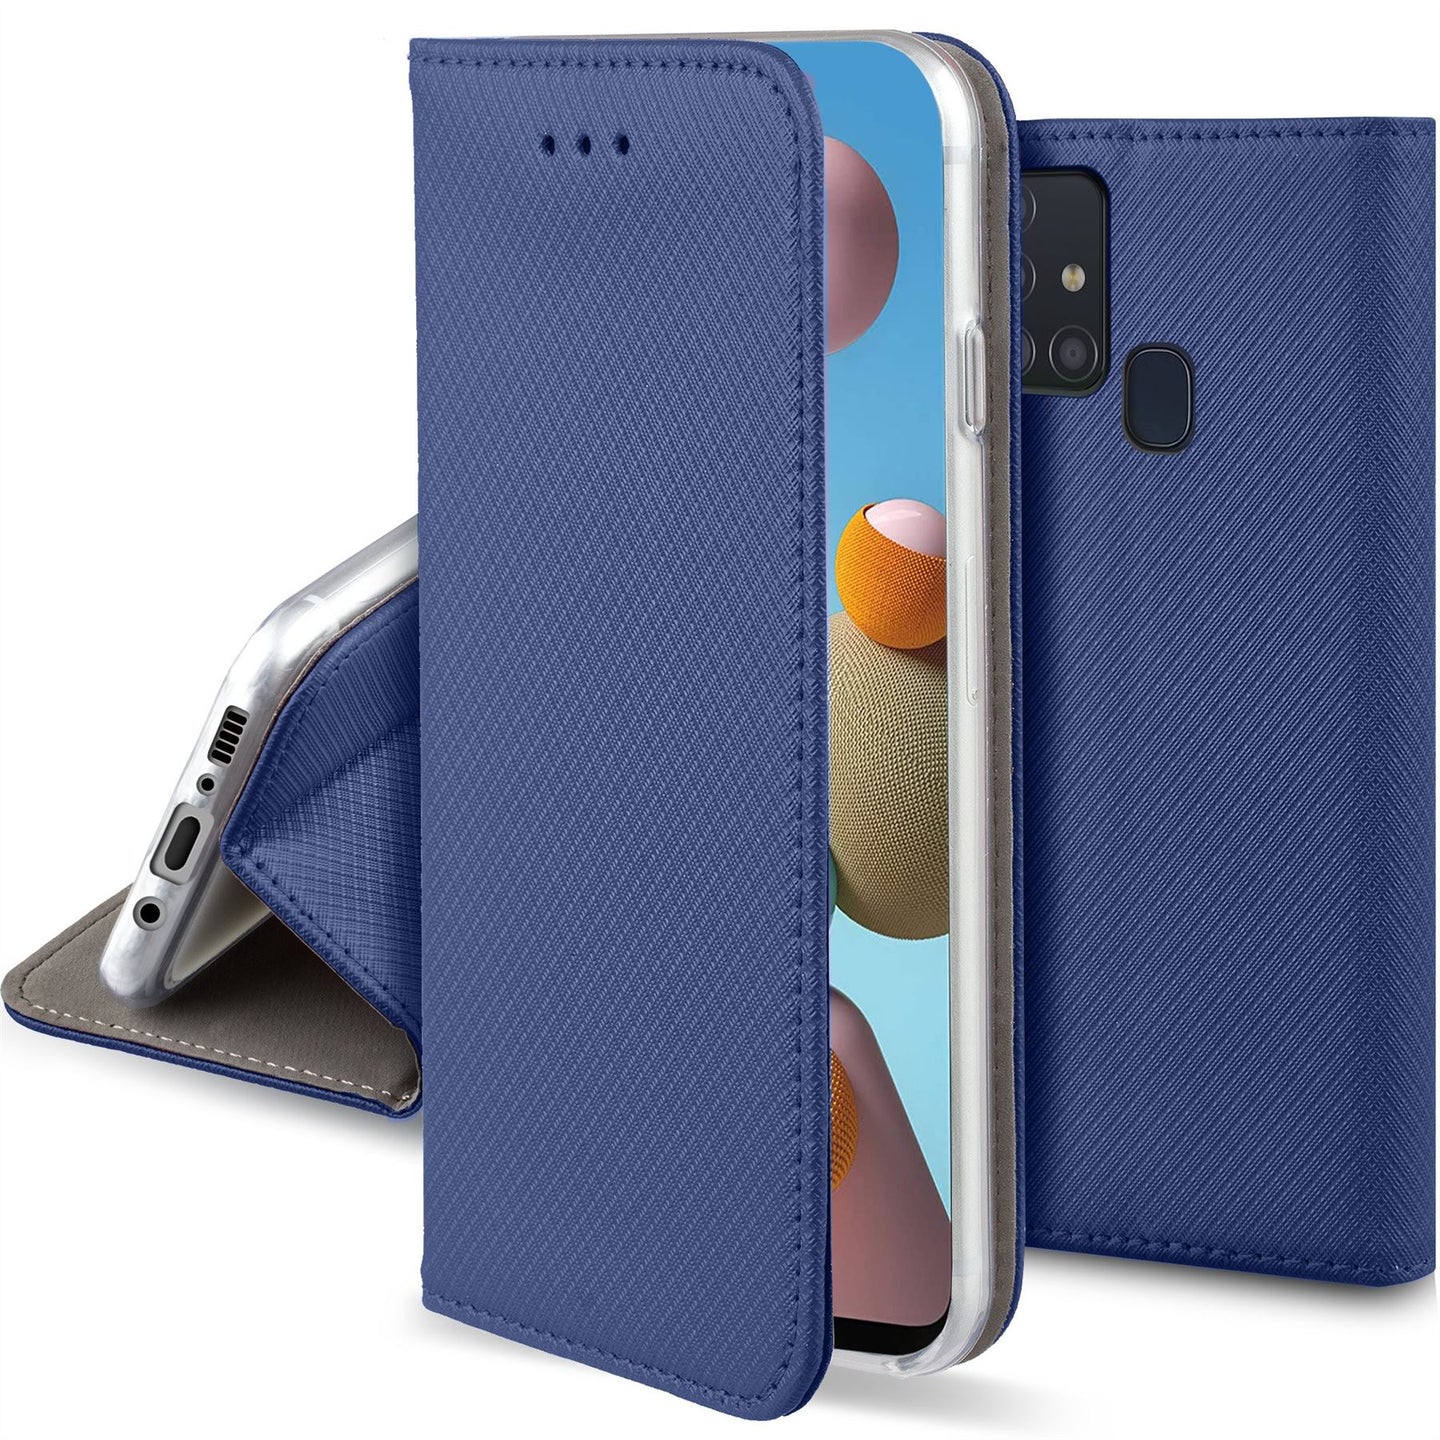 Moozy Case Flip Cover for Samsung A21s, Dark Blue - Smart Magnetic Flip Case with Card Holder and Stand